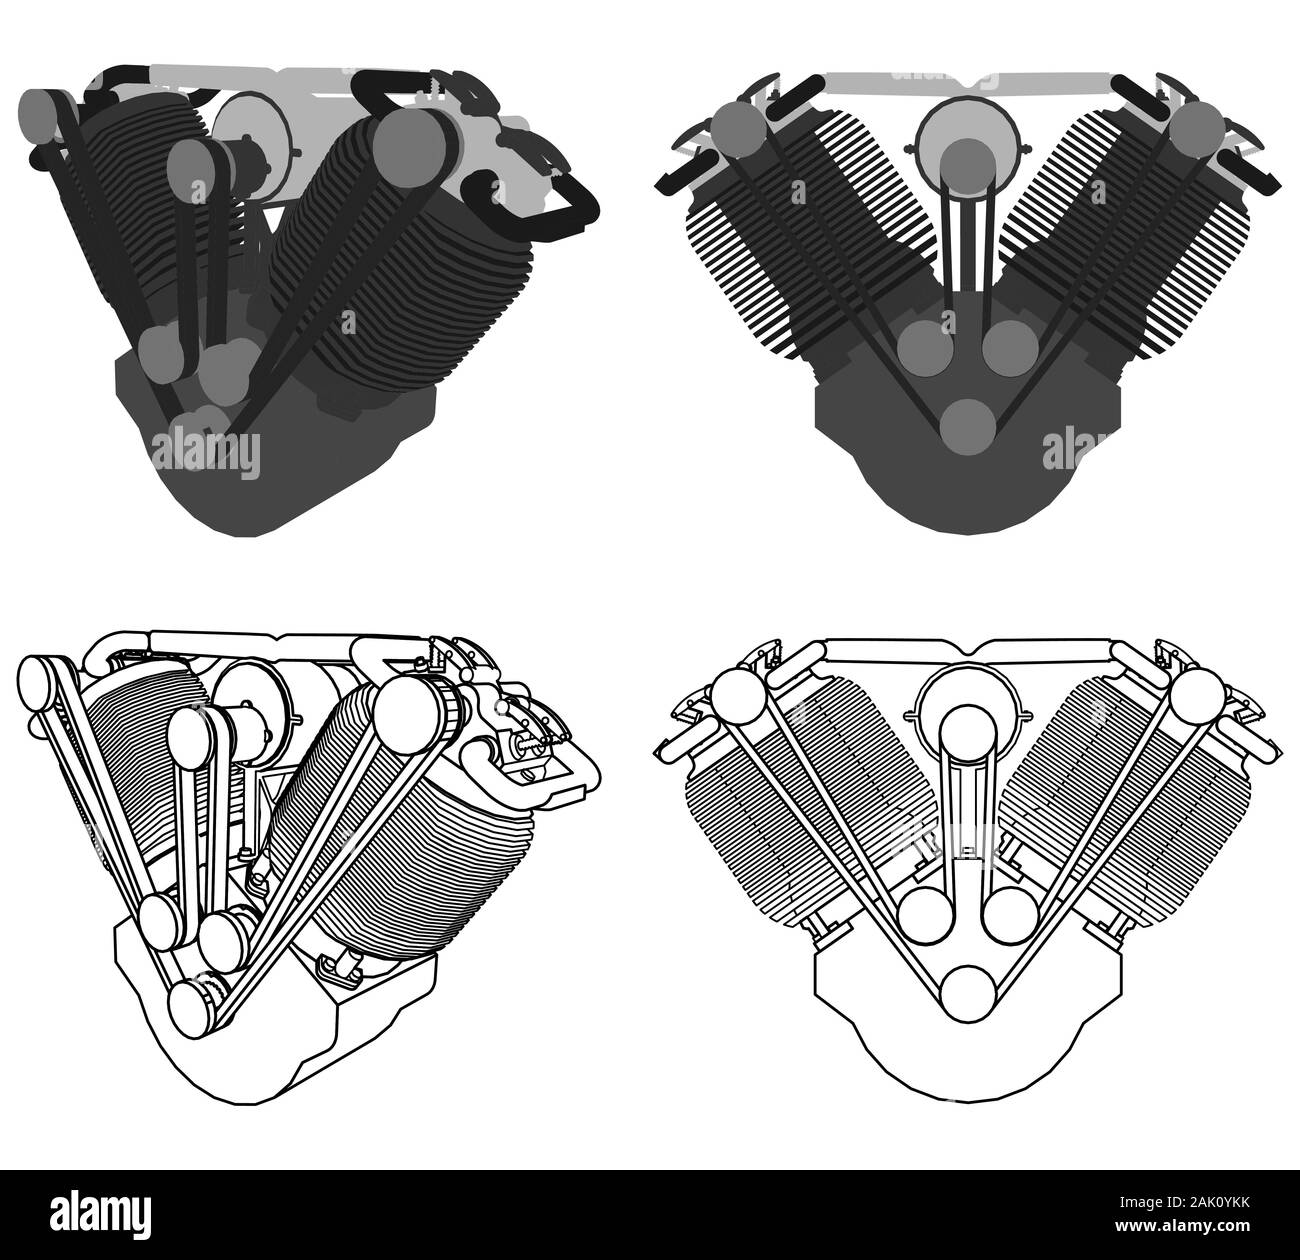 Engine V twin colored. Front view. Stock Vector